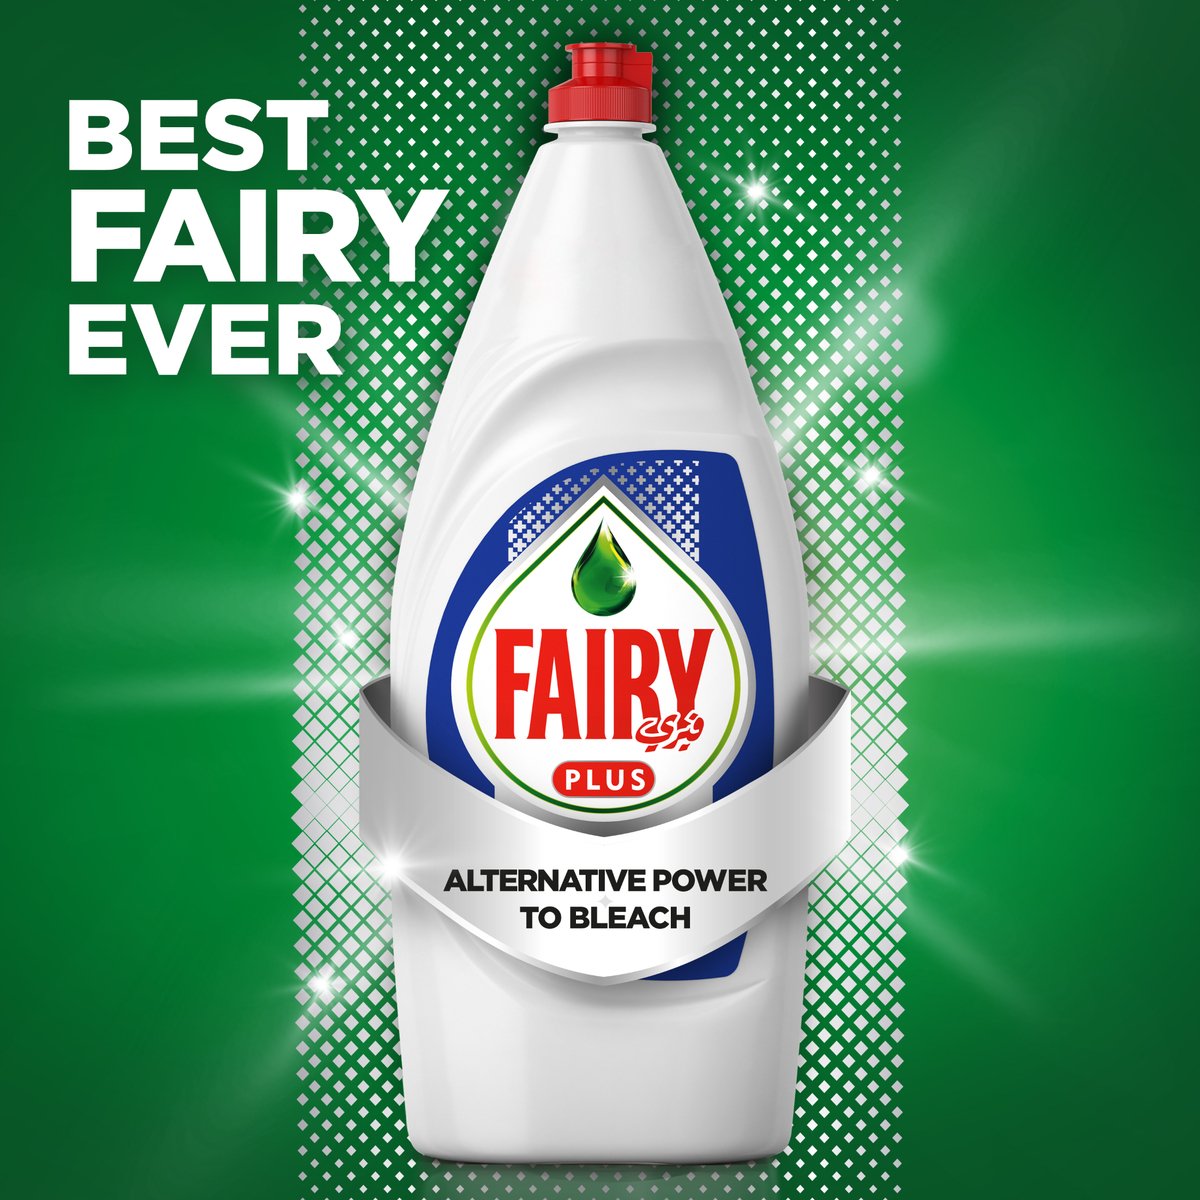 Fairy Plus Antibacterial Dishwashing Liquid Soap With Alternative Power To Bleach 1 Litre